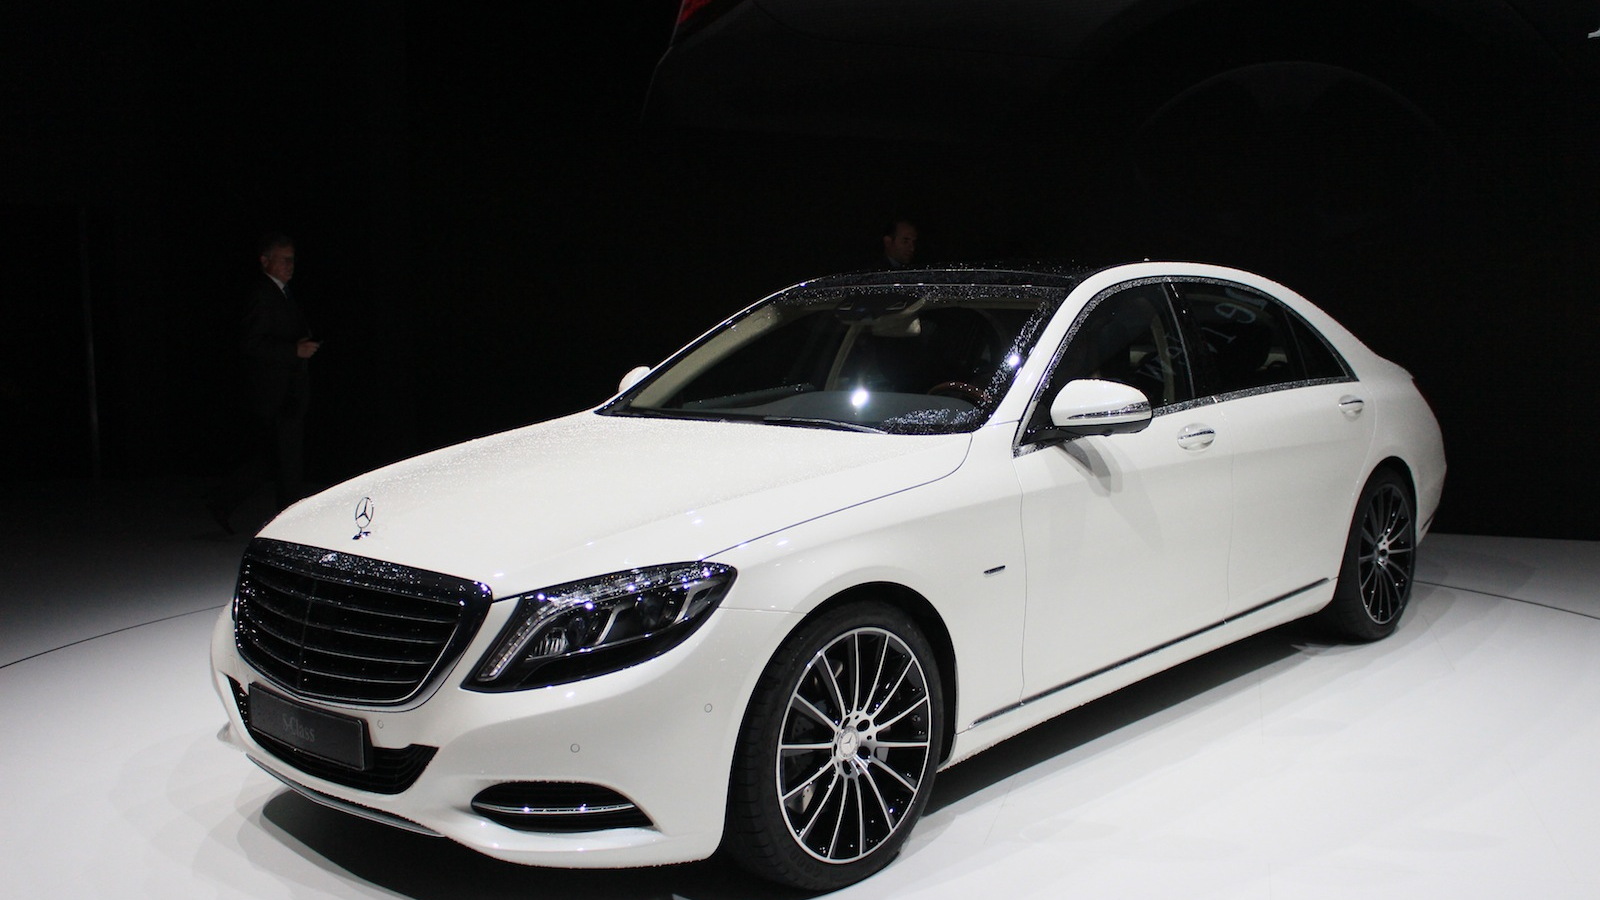 The 2014 Mercedes-Benz S Class was just unveiled this evening at an event in Hamburg. We were there 